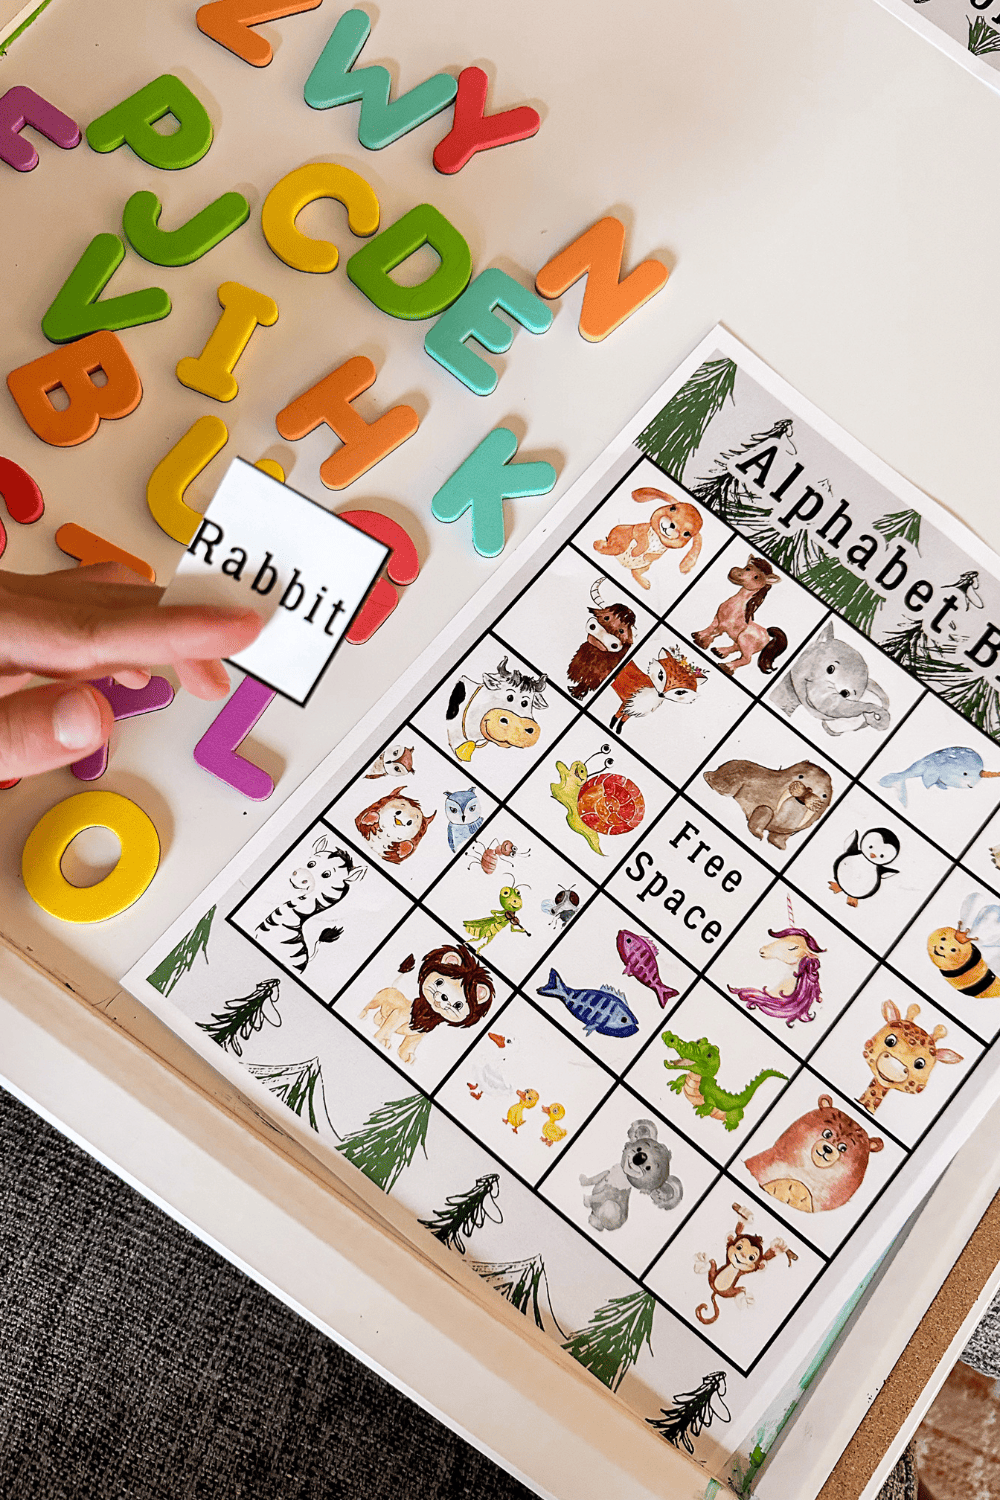 Alphabet bingo, a bingo board with a bunch of different animals. A hand holding a card that says Rabbit in the foreground